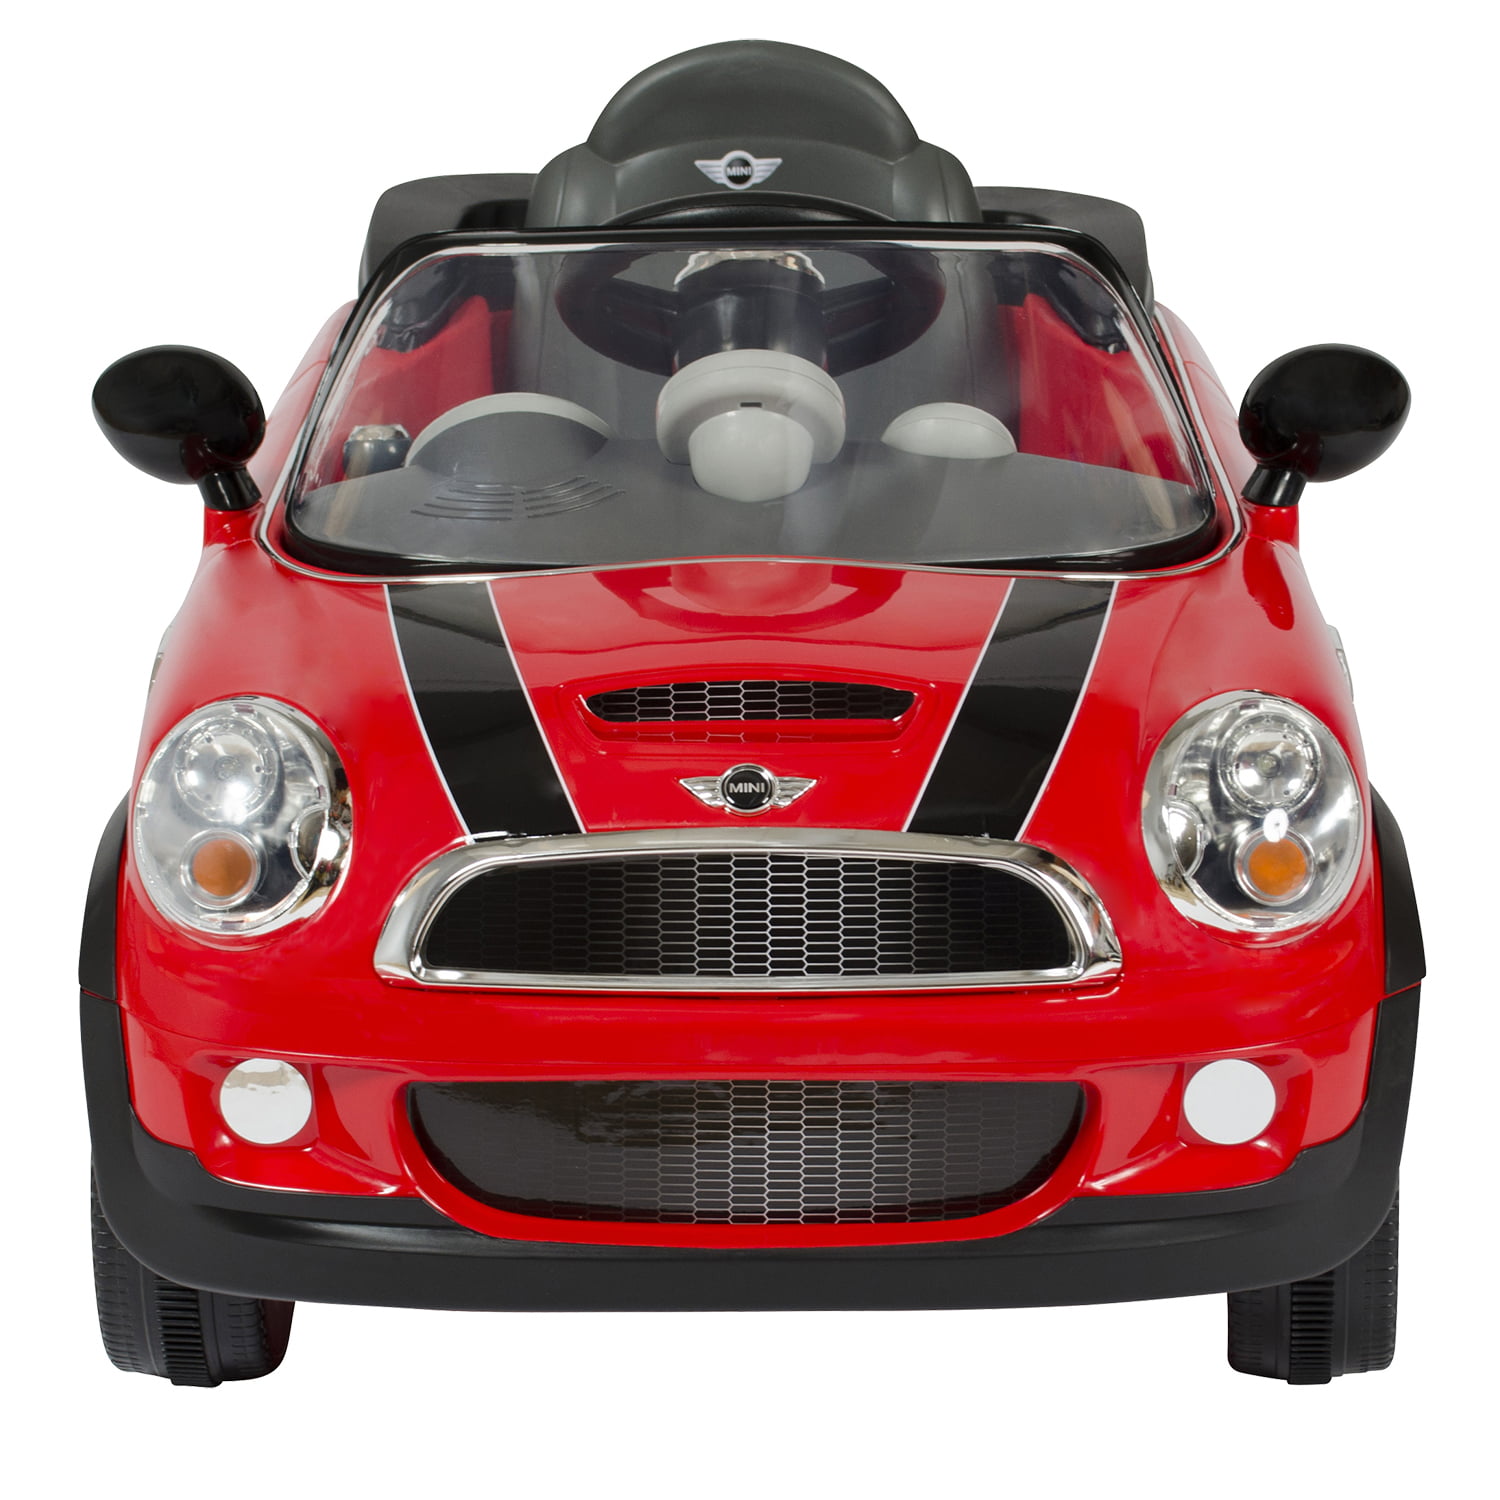 Zuiver Deens Huiswerk Rollplay 6 Volt MINI Cooper Ride On Toy, Battery-Powered Kid's Ride On Car  - Red - Walmart.com